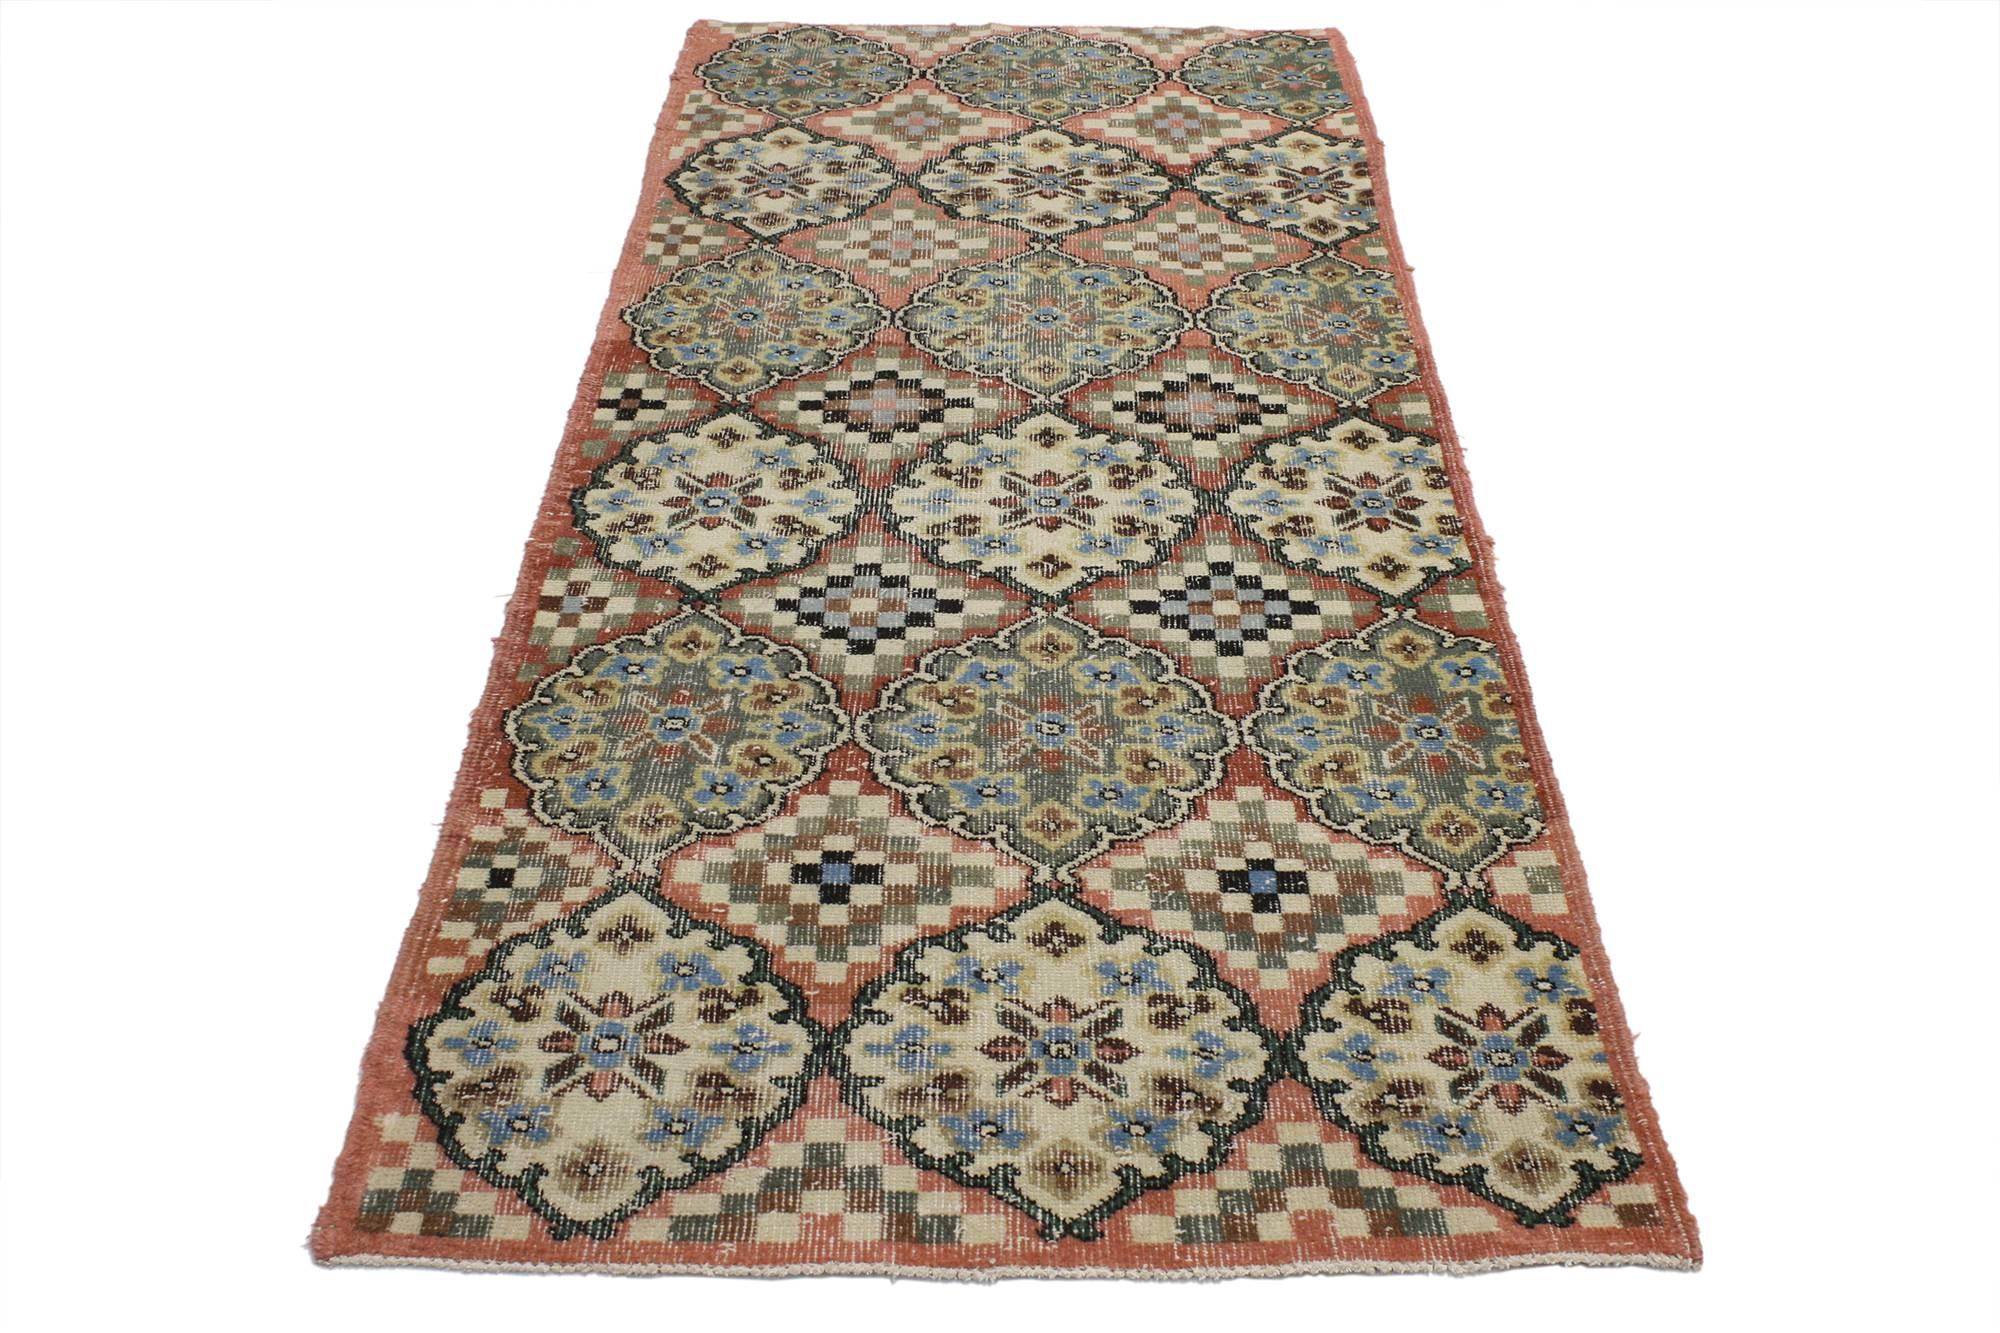 52013, distressed vintage Turkish Sivas accent rug in Swedish Farmhouse Style. This distressed Turkish Sivas rug features large alternating cusped medallions and stair-step amulets in rows of three in reverse color palettes. This vintage Turkish